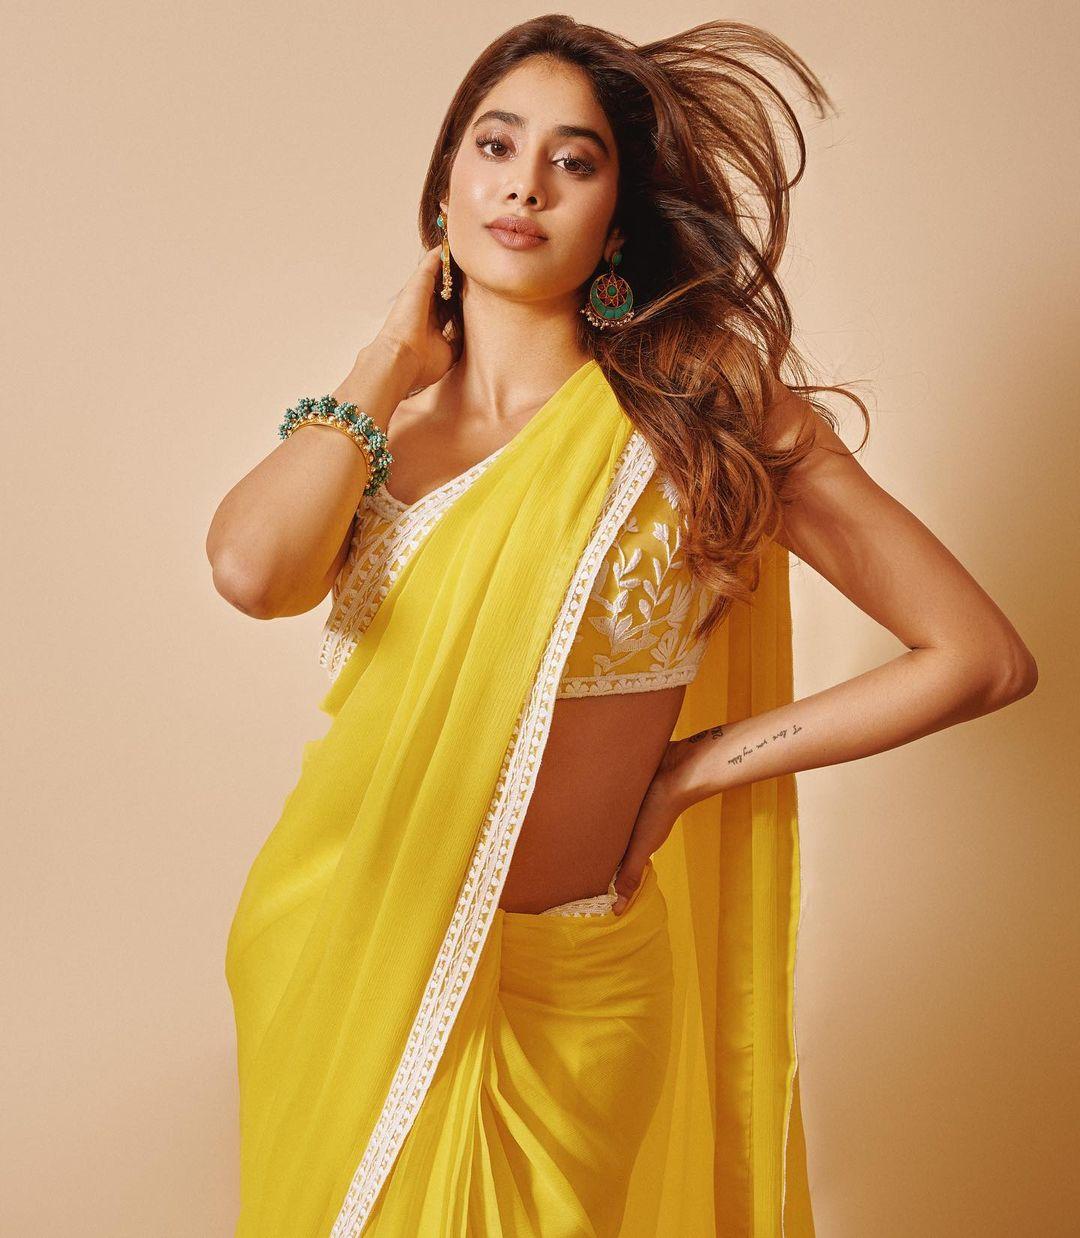  Janhvi Kapoor's traditional choices always leave us in awe. The actress effortlessly paired a plain yellow saree with a stunning embroidered blouse in this look